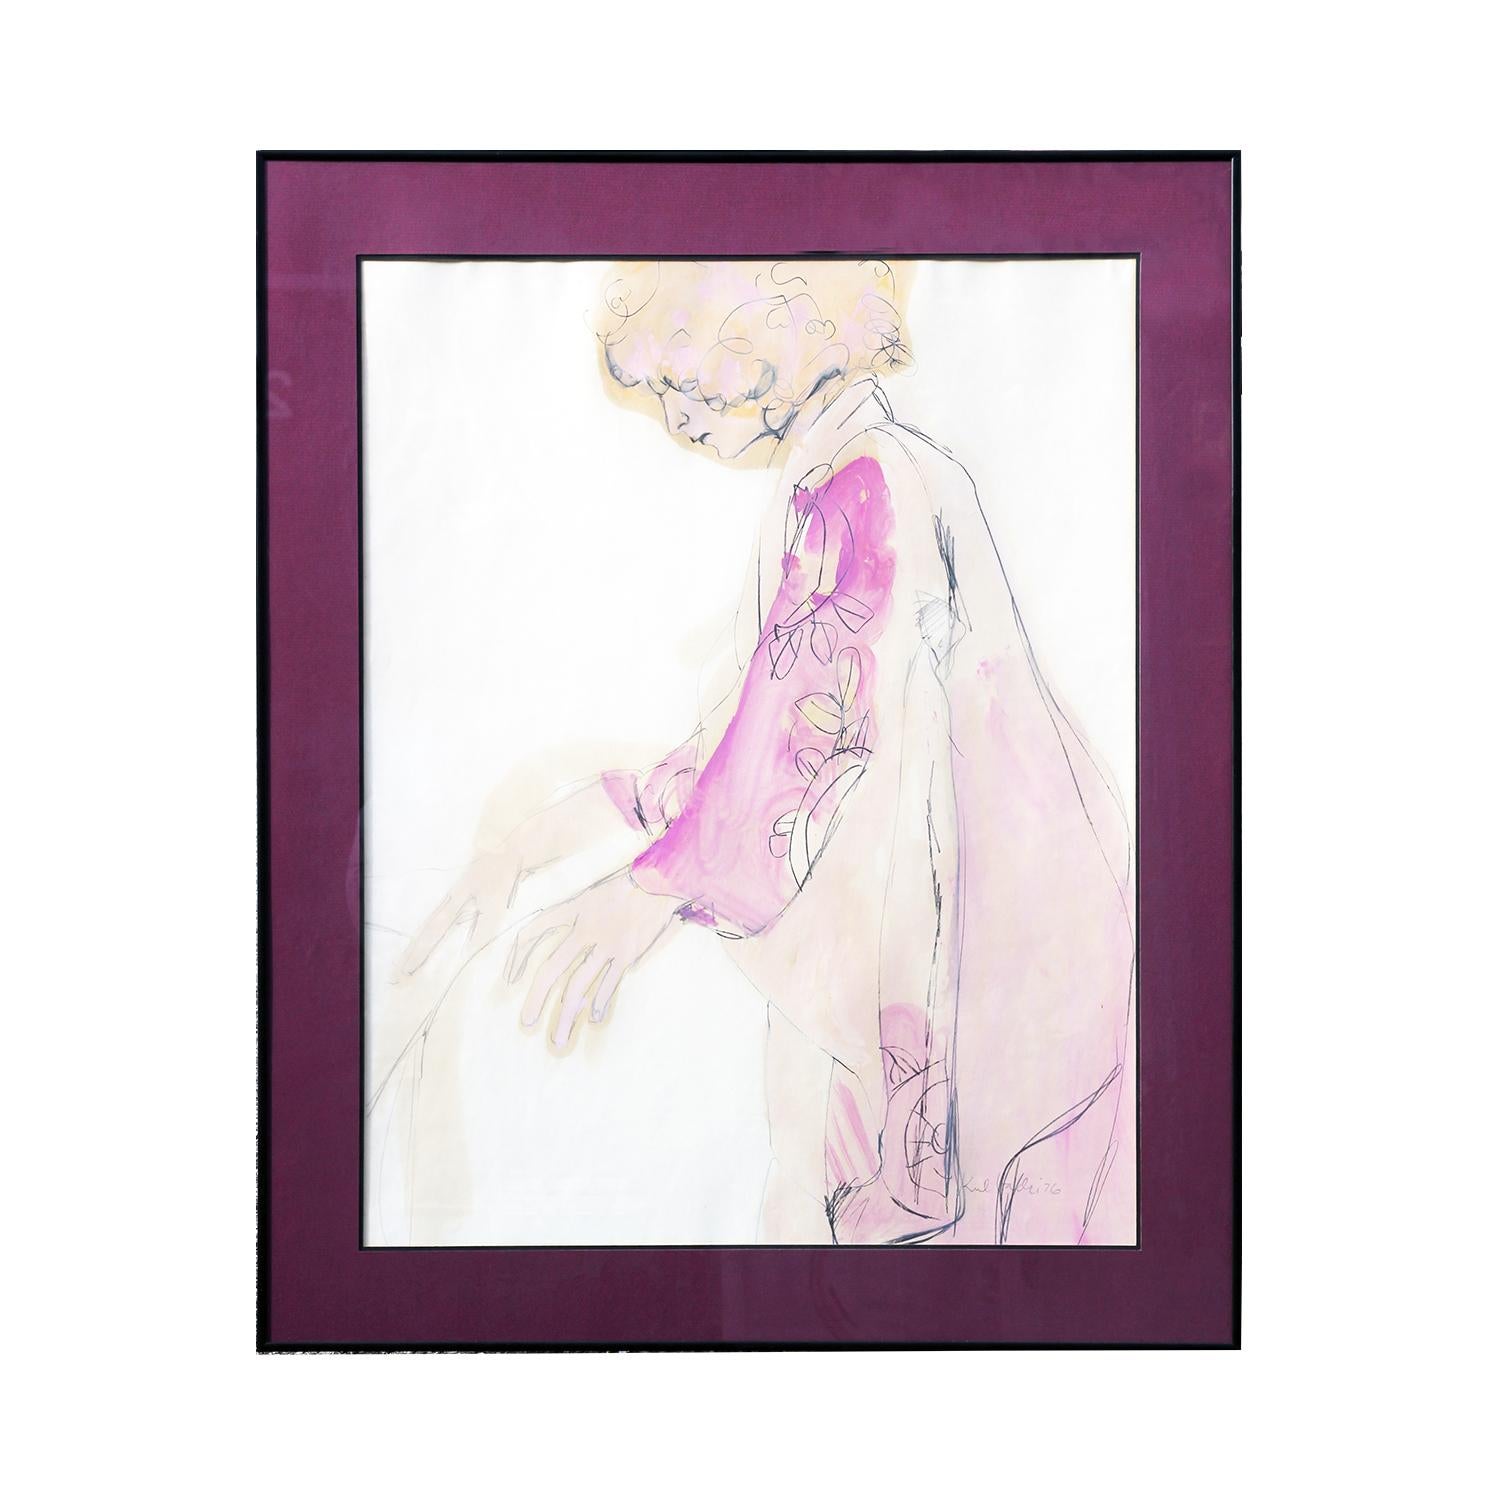 Pink Toned Female Portrait in a Kimono - Art by Unknown